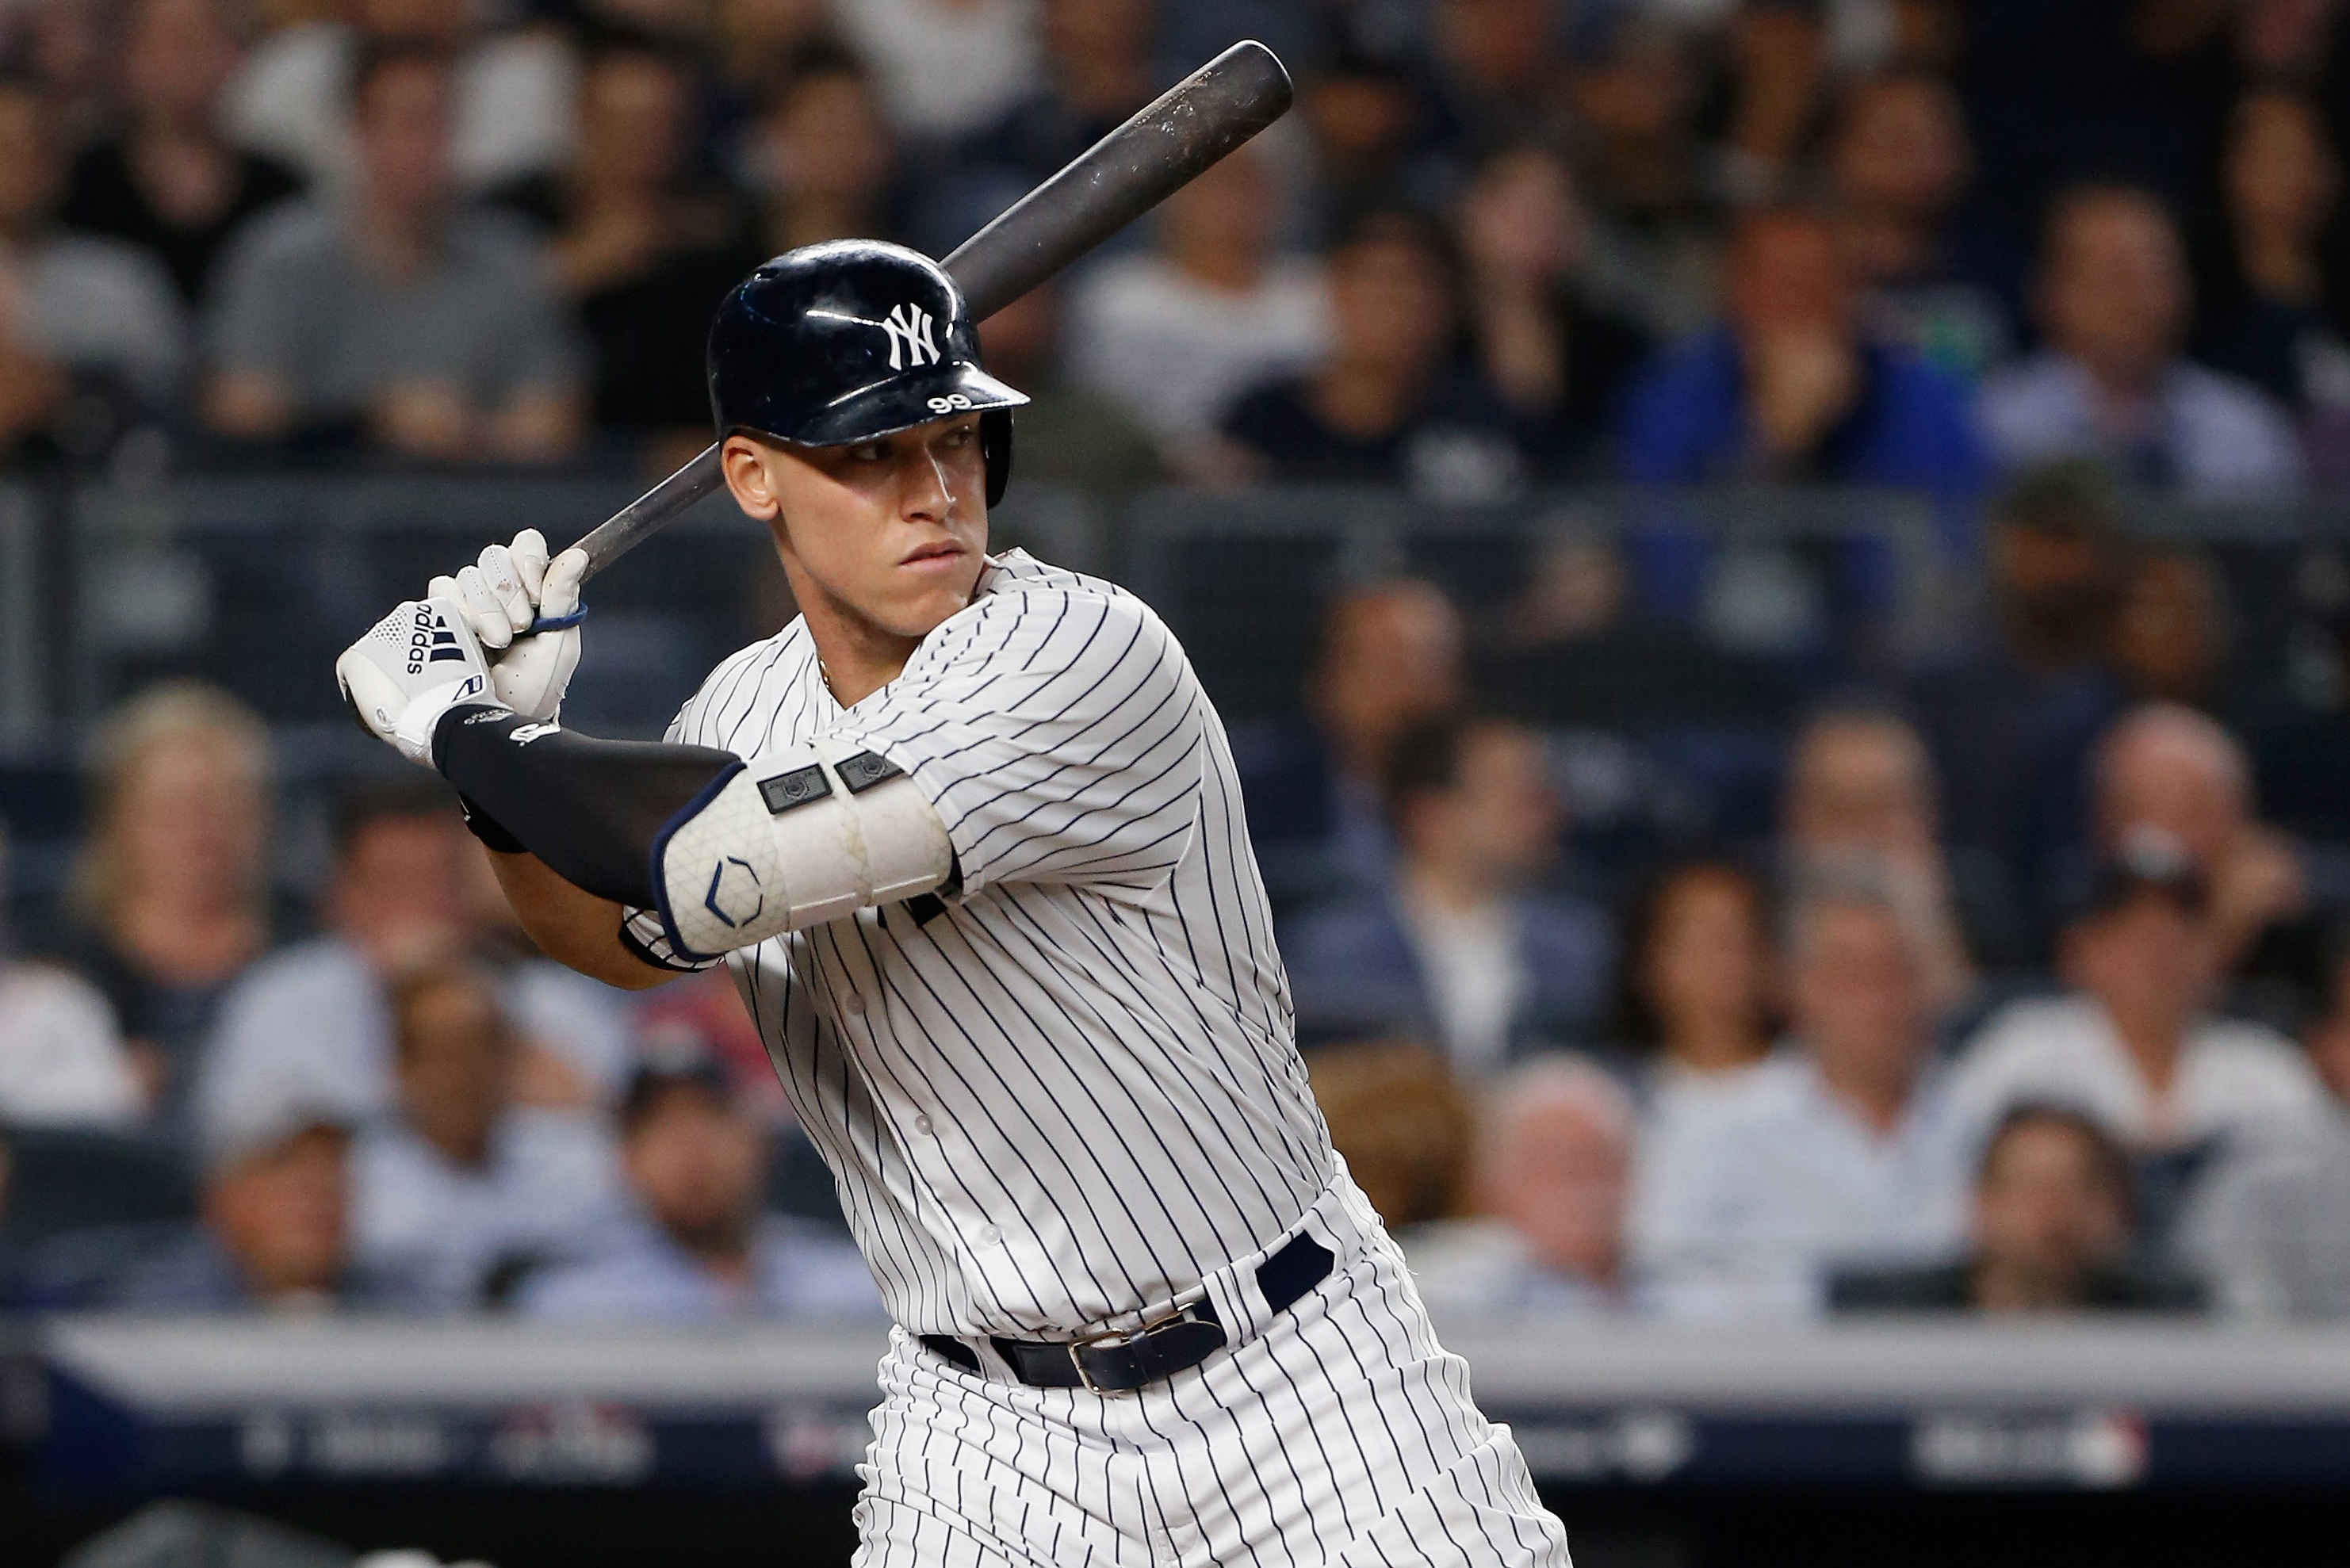 aaron judge all rise foundation